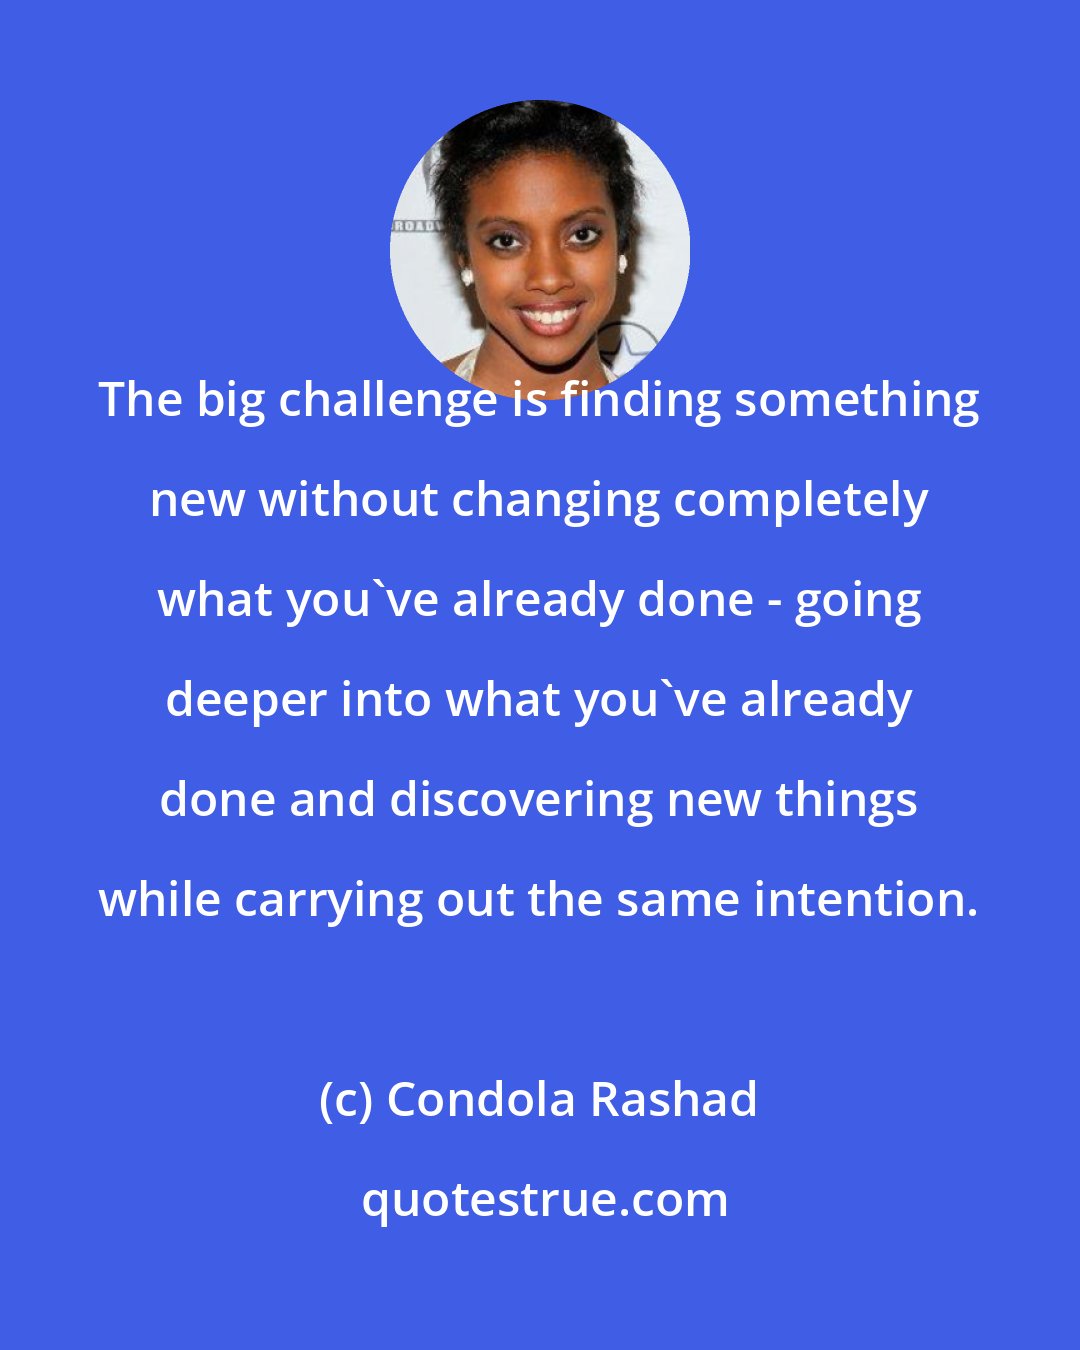 Condola Rashad: The big challenge is finding something new without changing completely what you've already done - going deeper into what you've already done and discovering new things while carrying out the same intention.